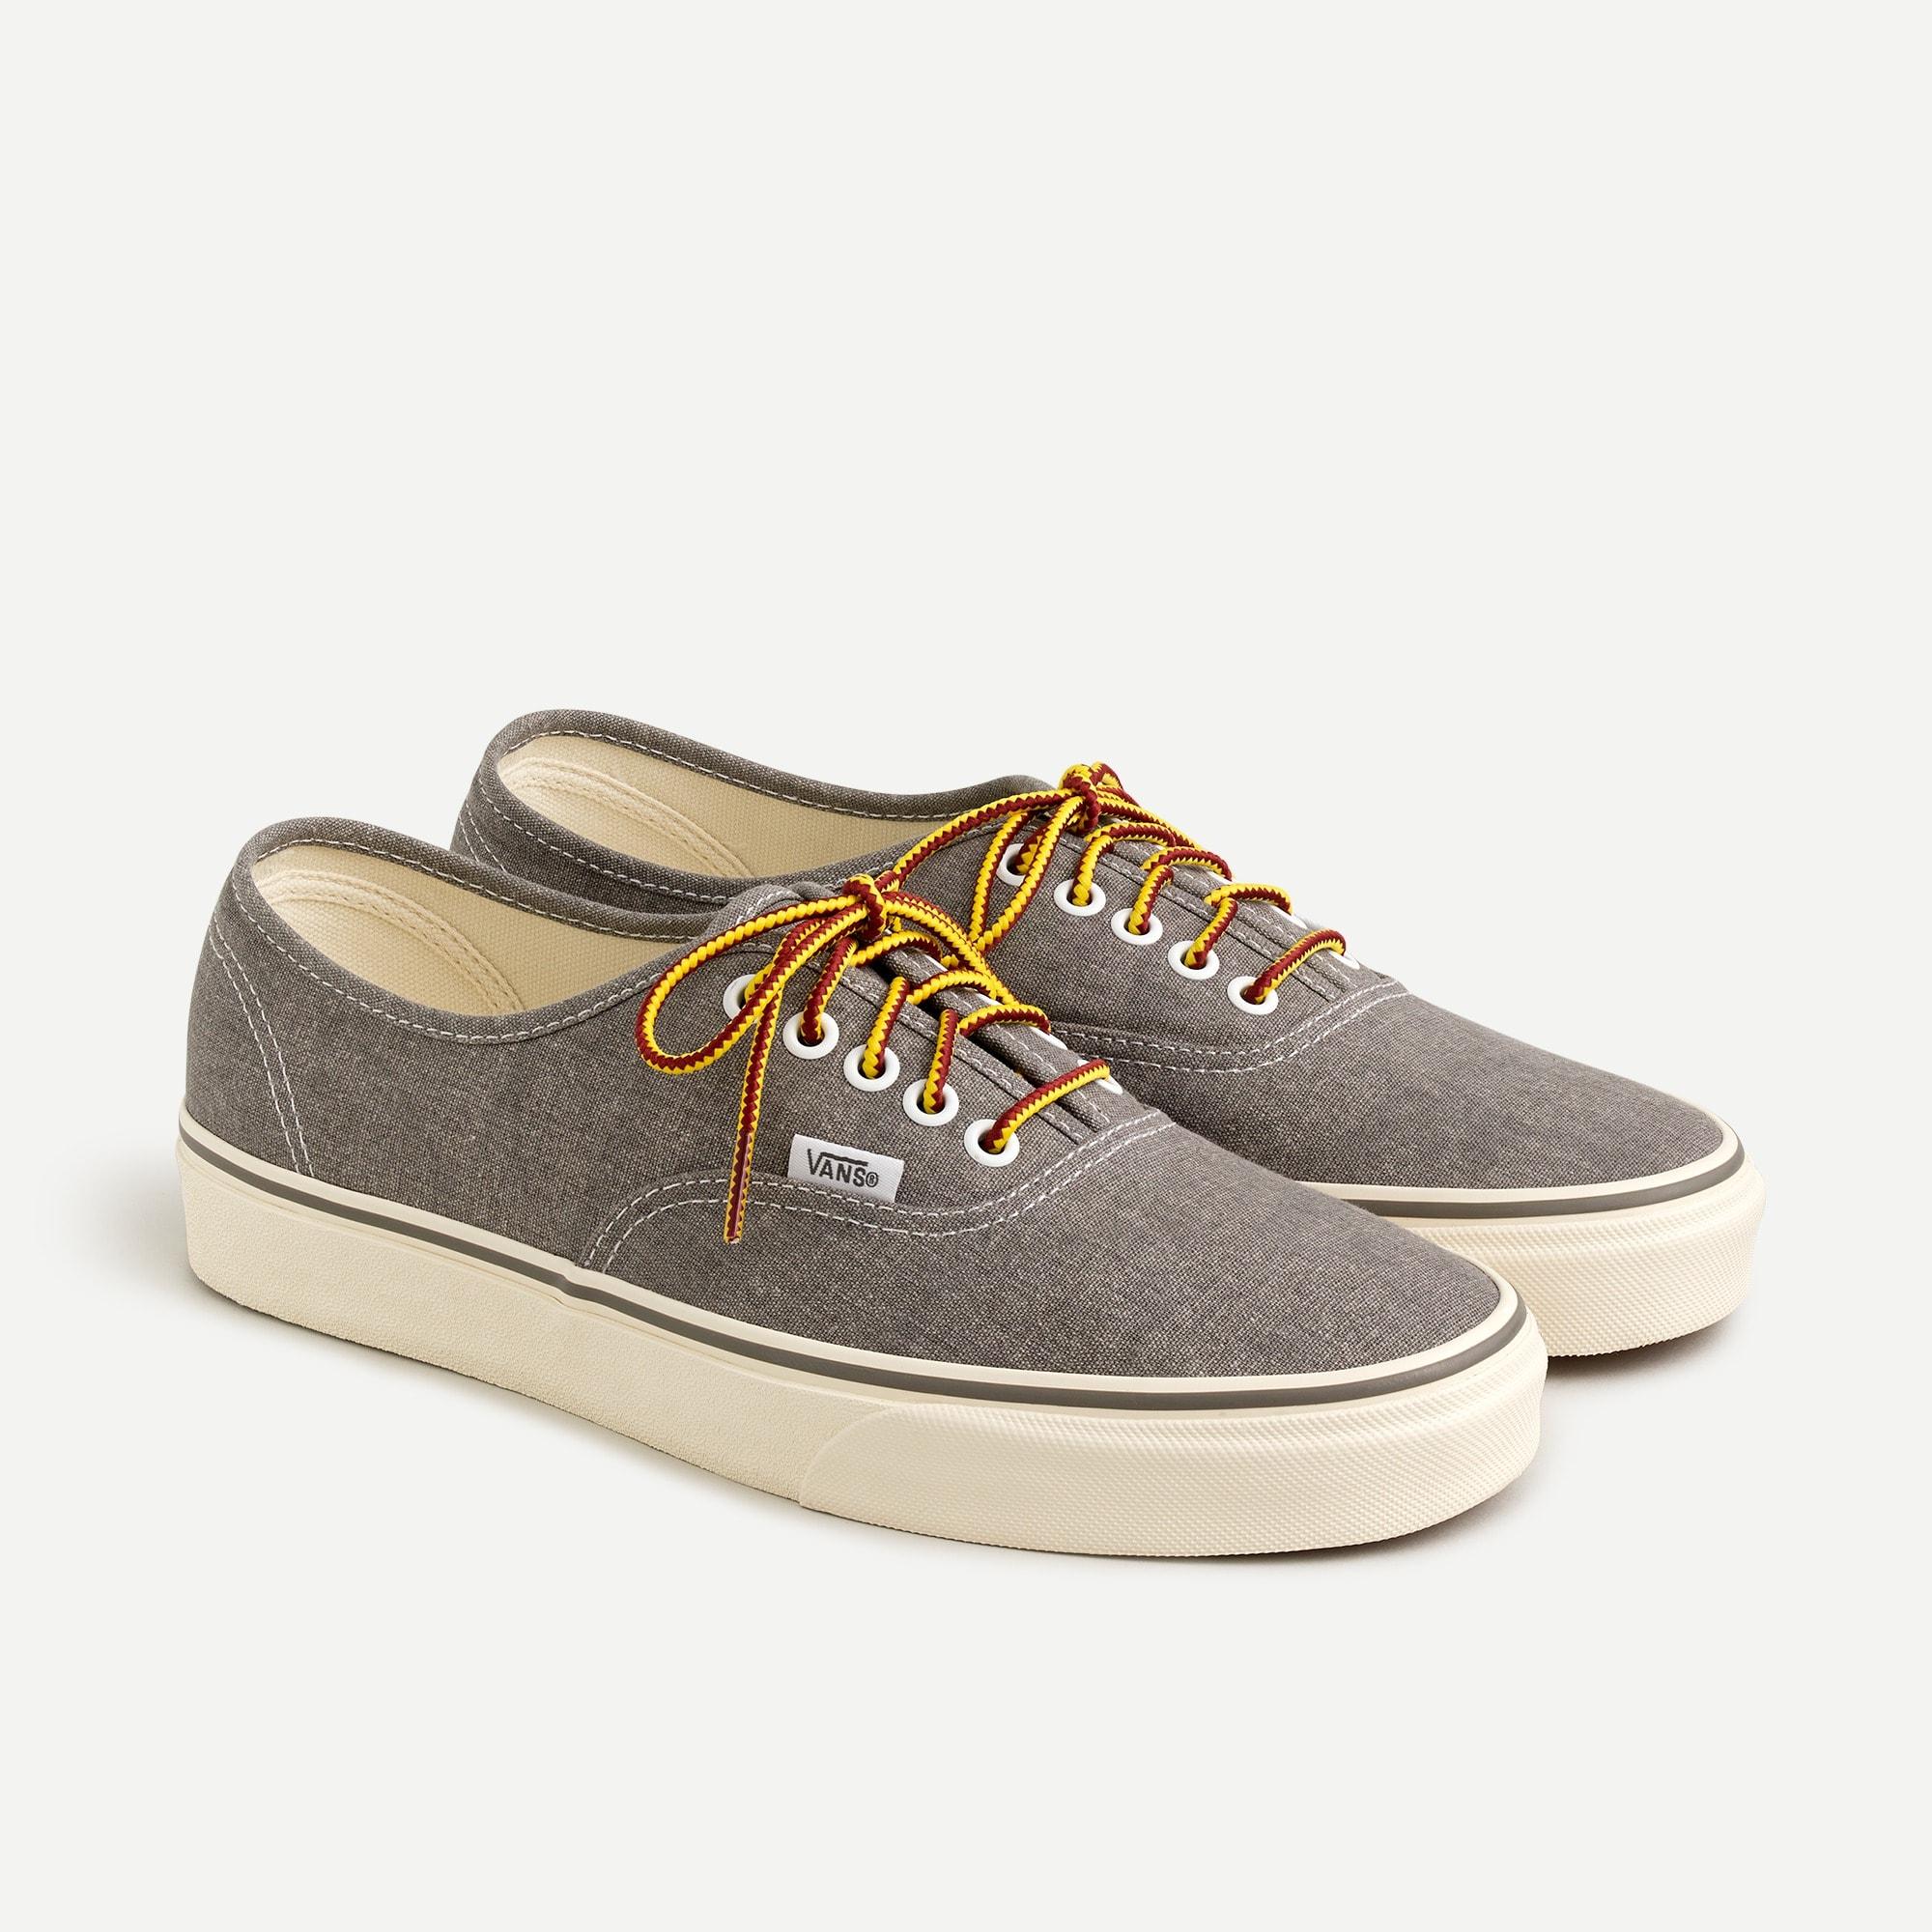 Vans ® For J.crew Washed Canvas Authentic Sneakers in Nickel (Metallic) |  Lyst